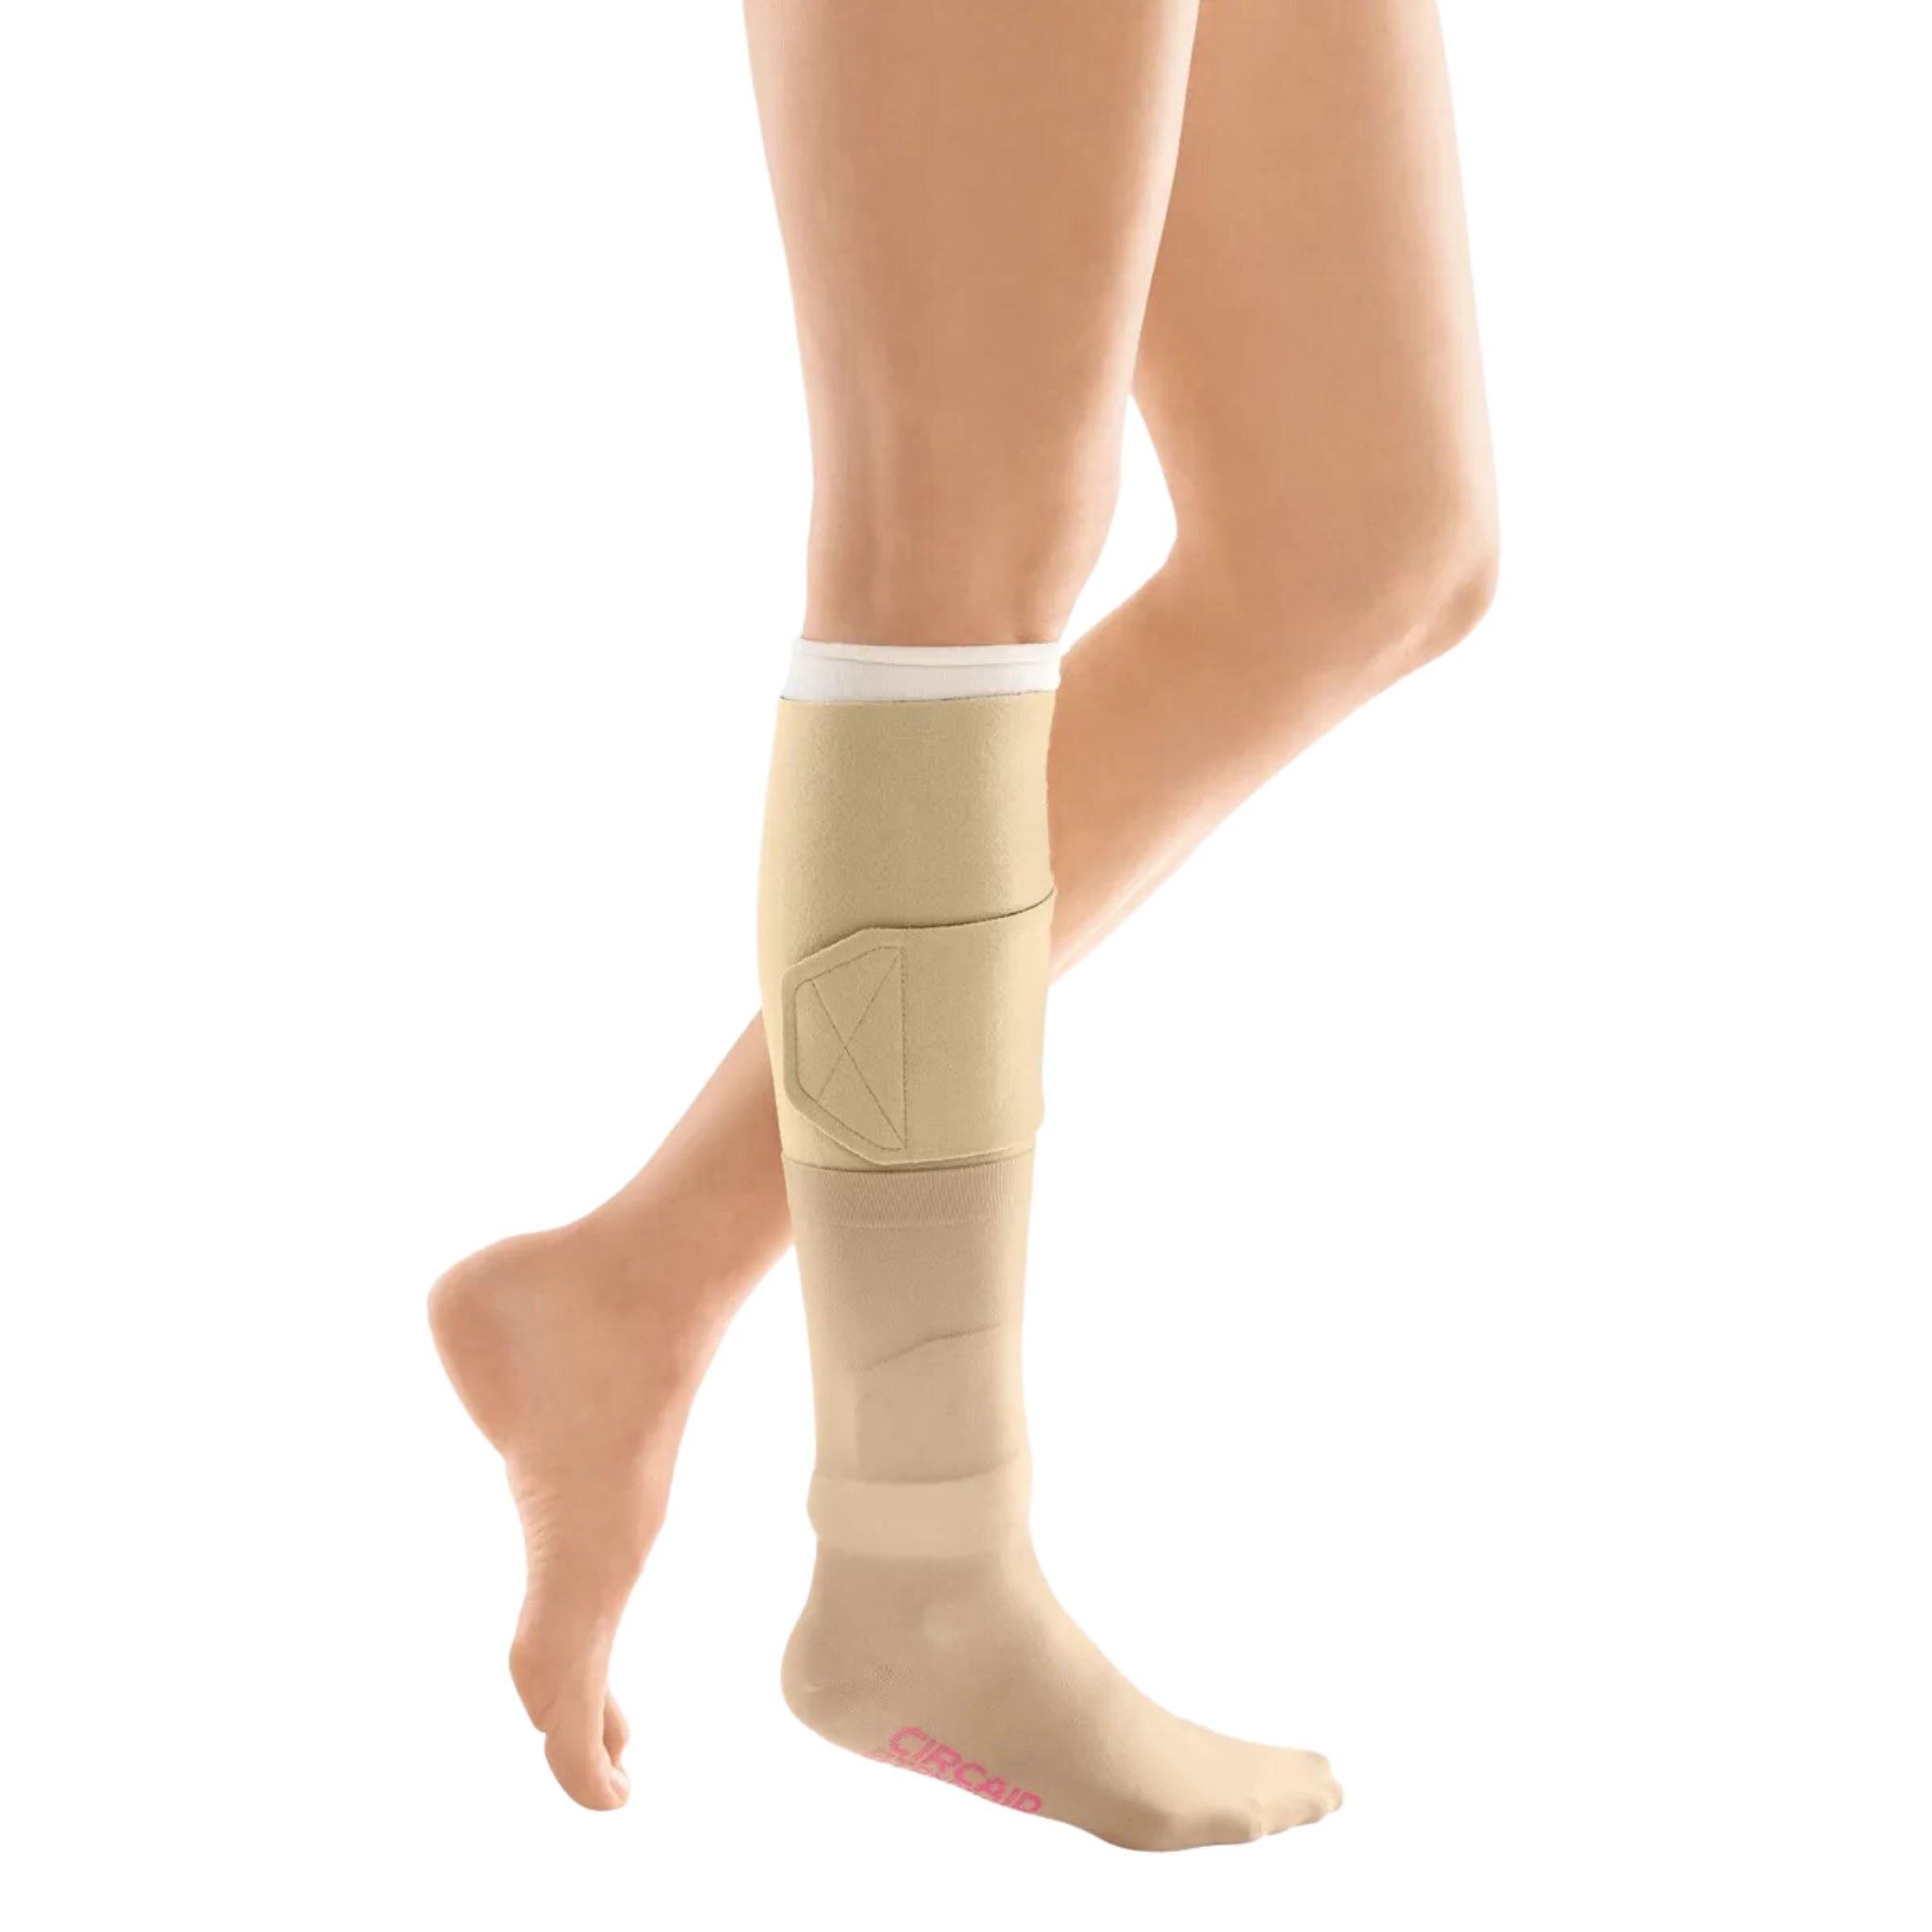 circaid® juxtalite with Compressive Anklets